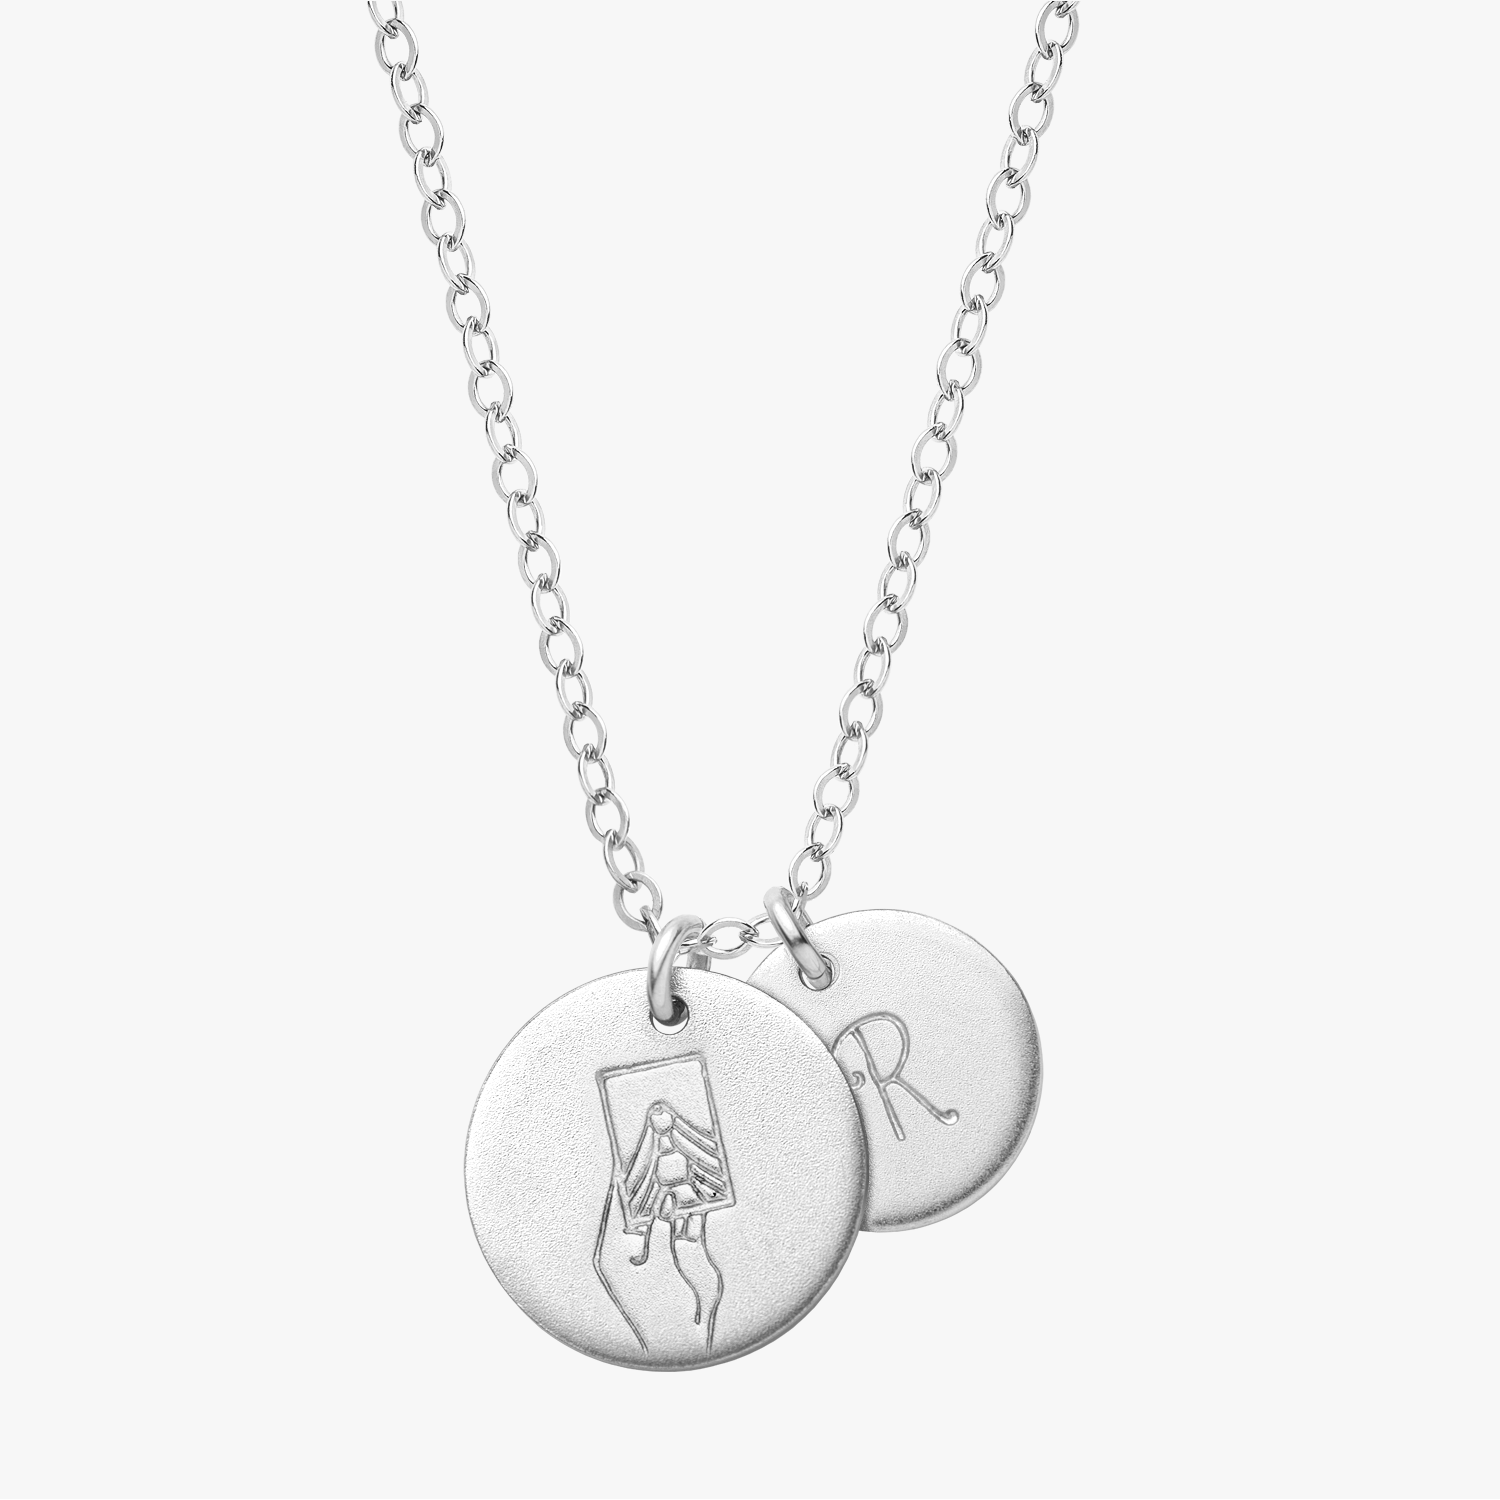 Personalized Tarot Initial Necklace Silver